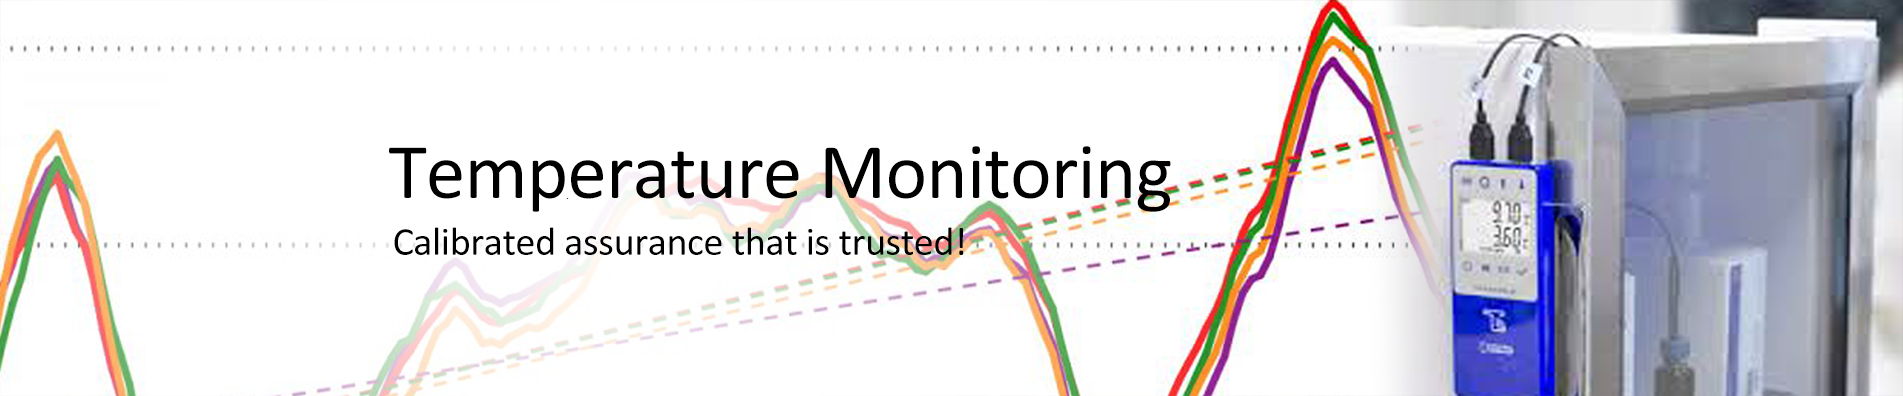 Monitoring Devices header